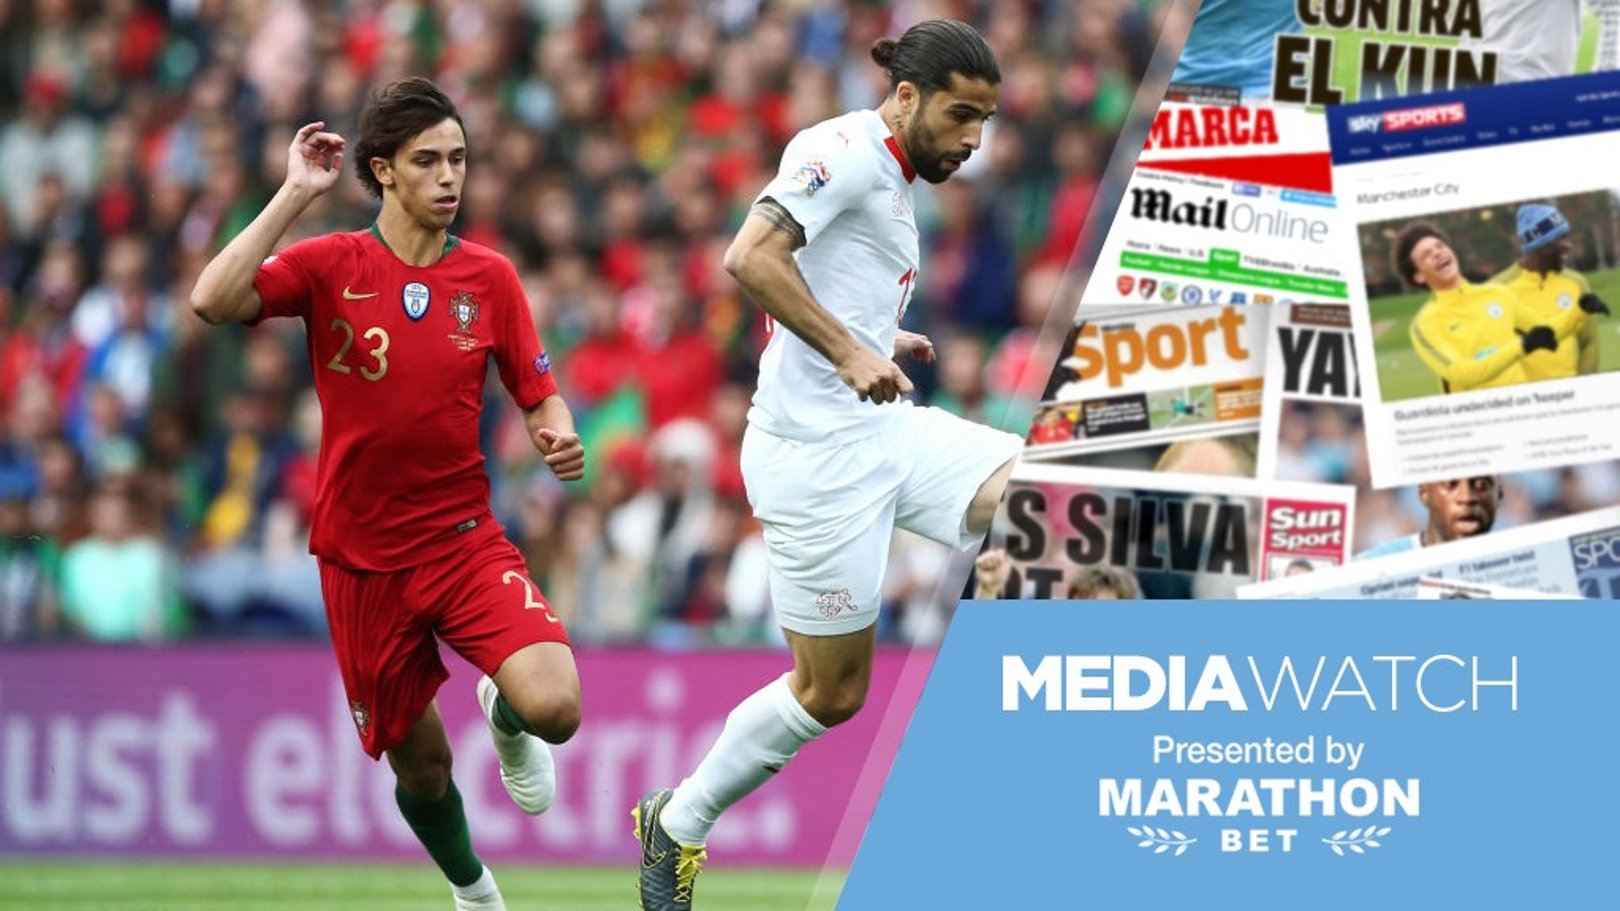 Media Watch: City ‘most likely’ team for teen?